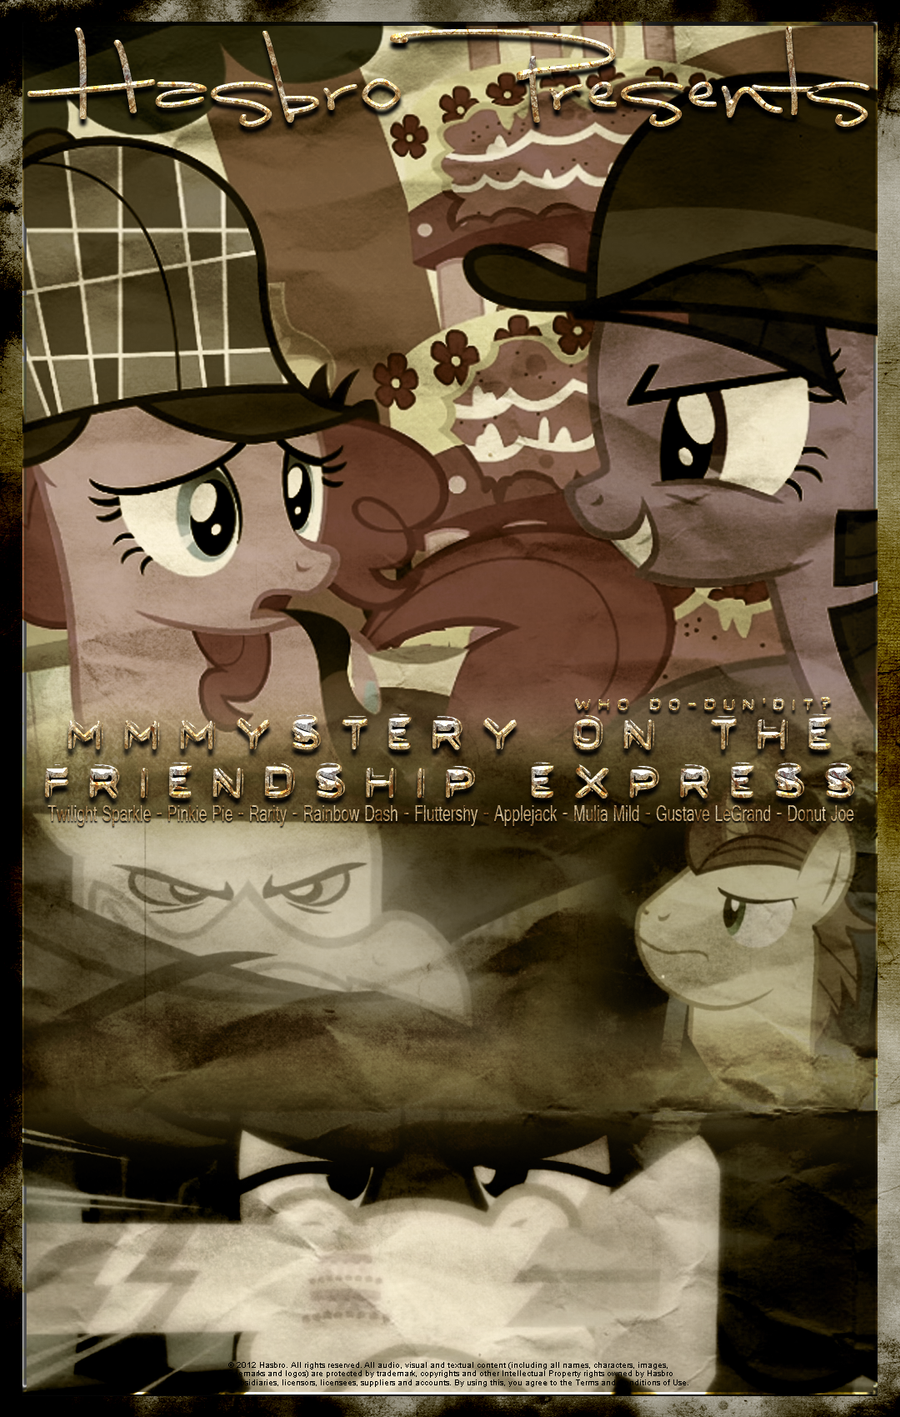 mlp___mmmystery_on_the_friendship_____movie_poster_by_pims1978-d53v5i2.png